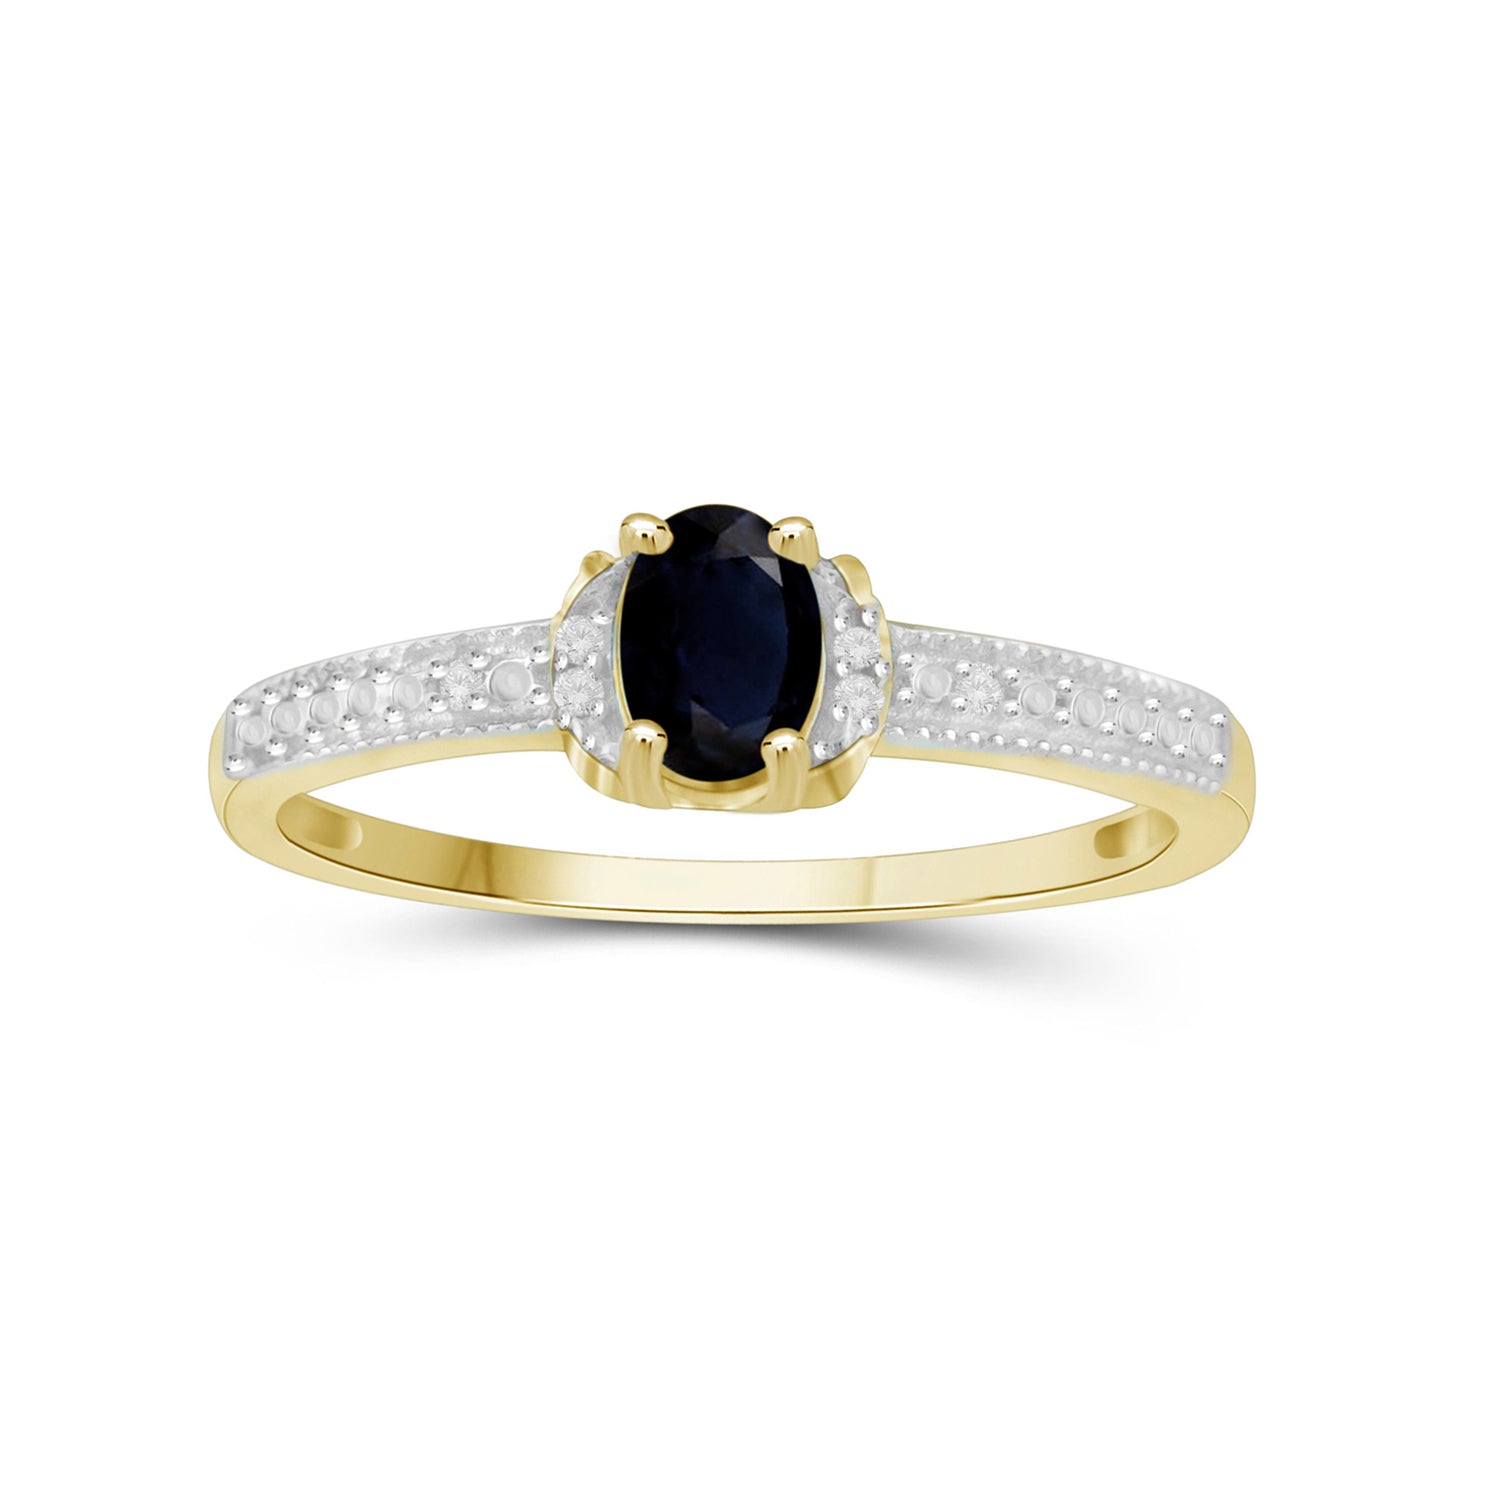 0.67 Carat T.G.W. Sapphire Gemstone and Accent White Diamond 14K Gold-Plated Ring